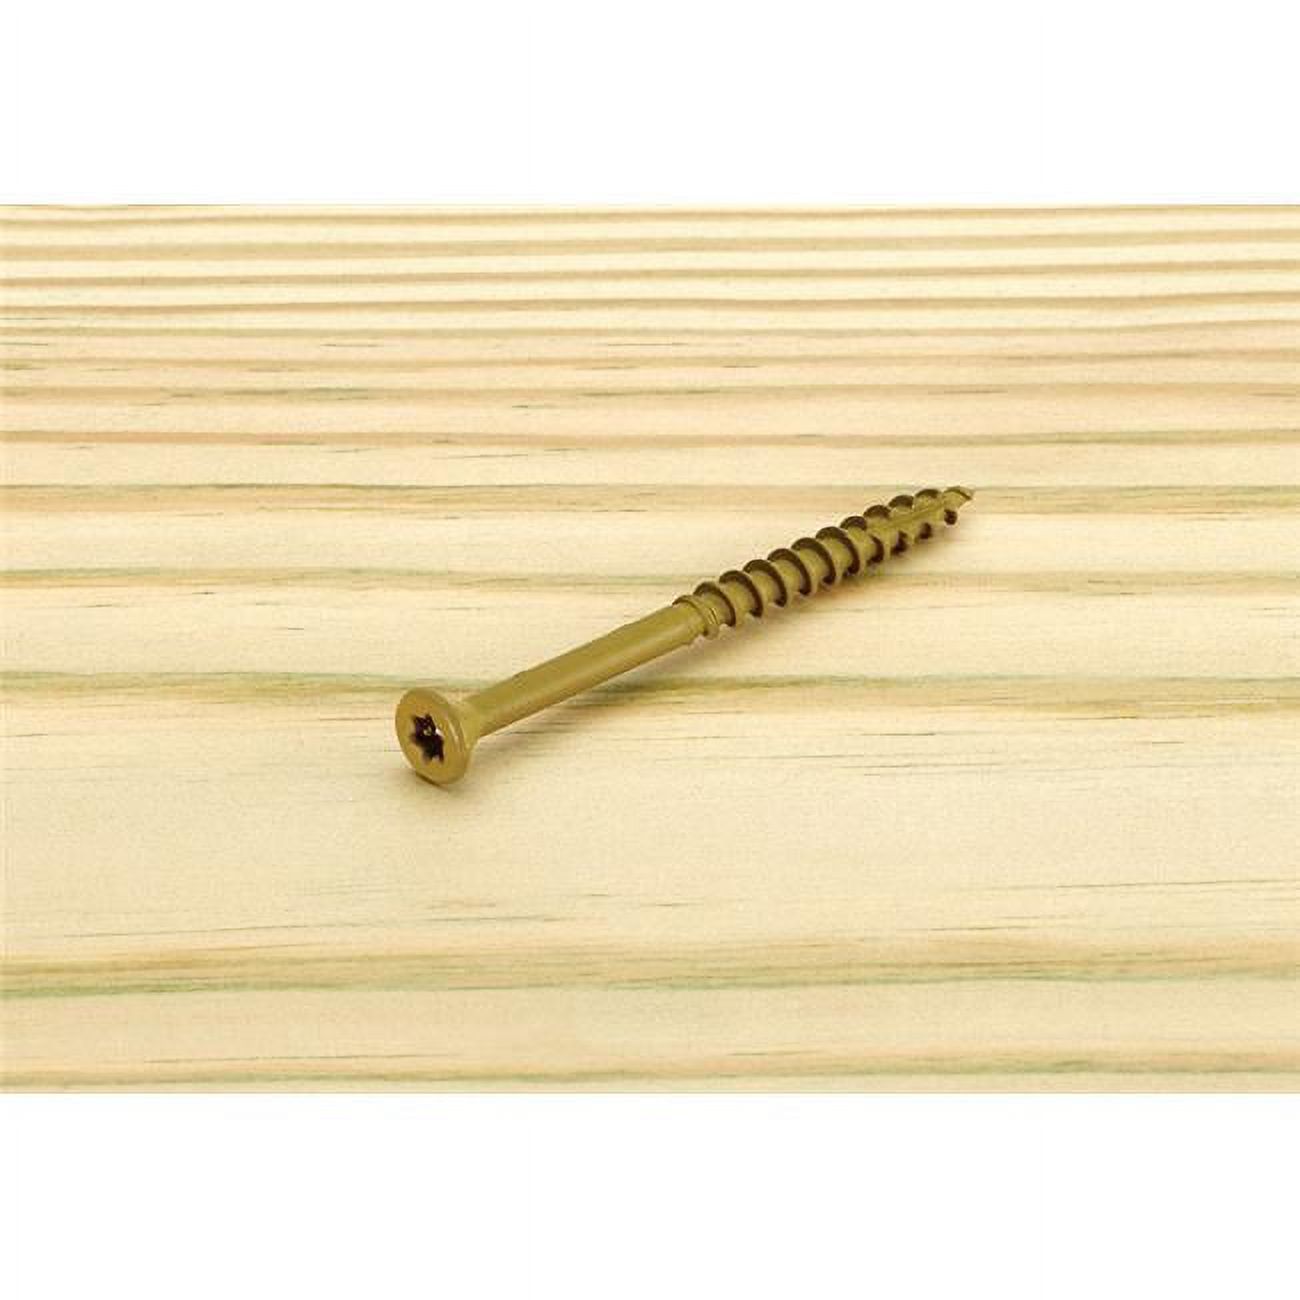 No.9 x 2.5 in. Star Flat Head Epoxy Coated Carbon Steel Deck Screws, Pack of 2500 - image 1 of 1